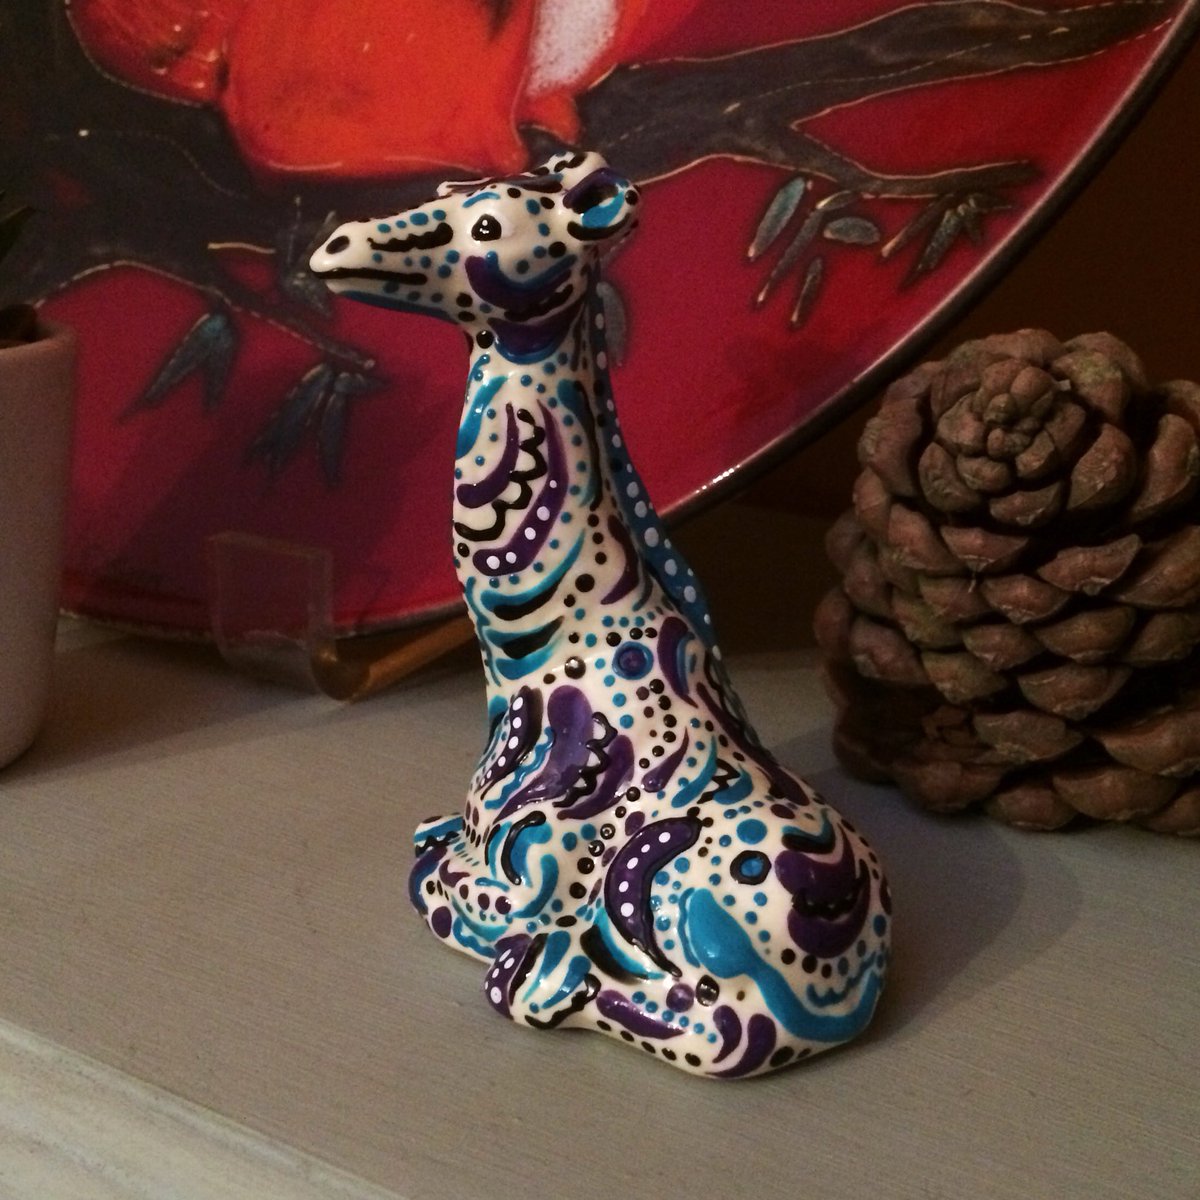 Get this lovely giraffe in my Etsy shop. This one is painted in rich purple and aqua blue that work perfect together. £13.99 with free uk shipping etsy.me/2ThYaPr #ukgifthour #ukgifthouram #earlybiz #crafturday #satchatuk